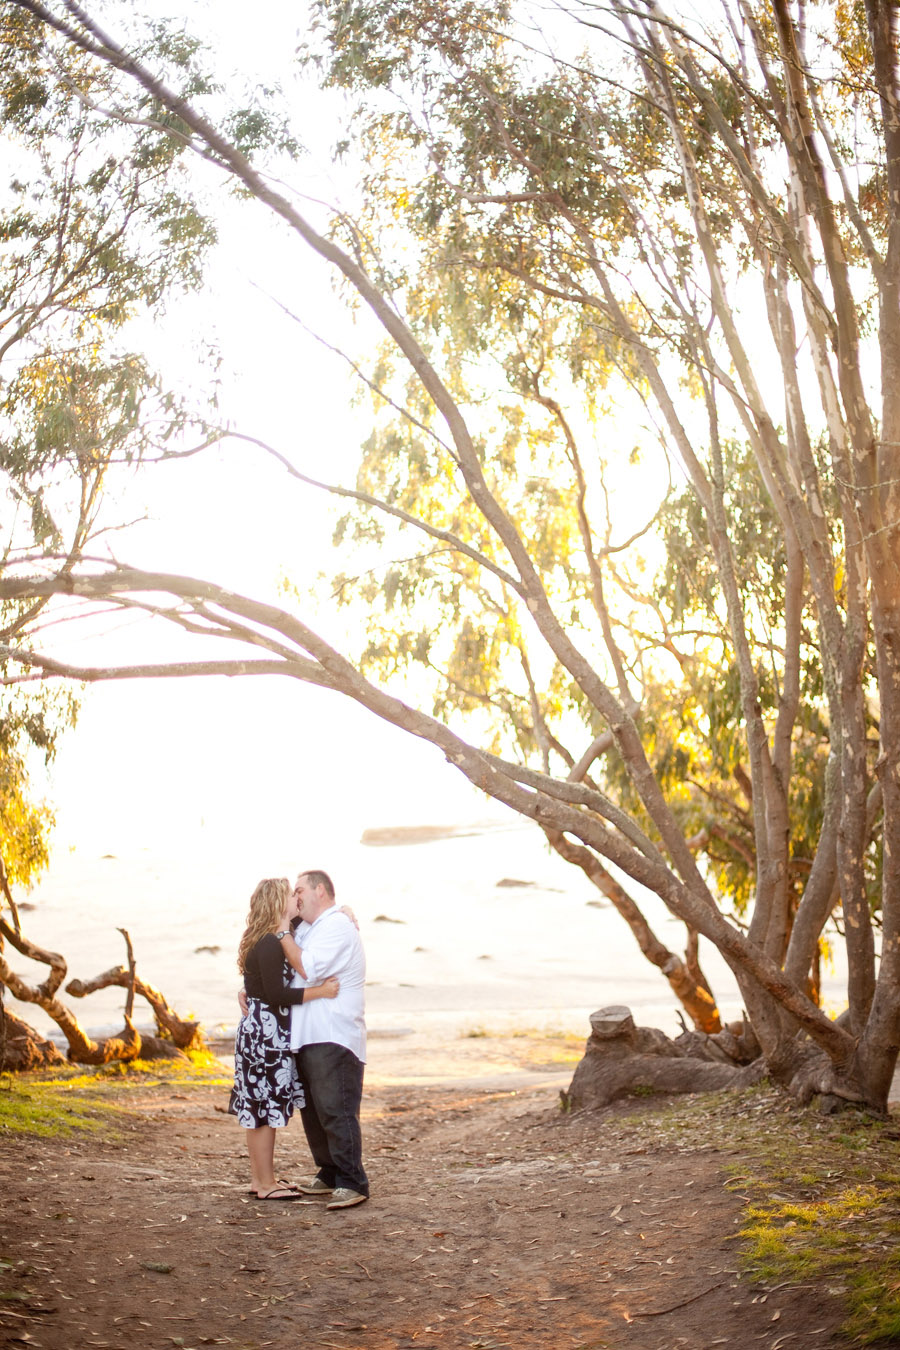 The couple sneaks a kiss while walking down to the Natural Bridges State Park beach.